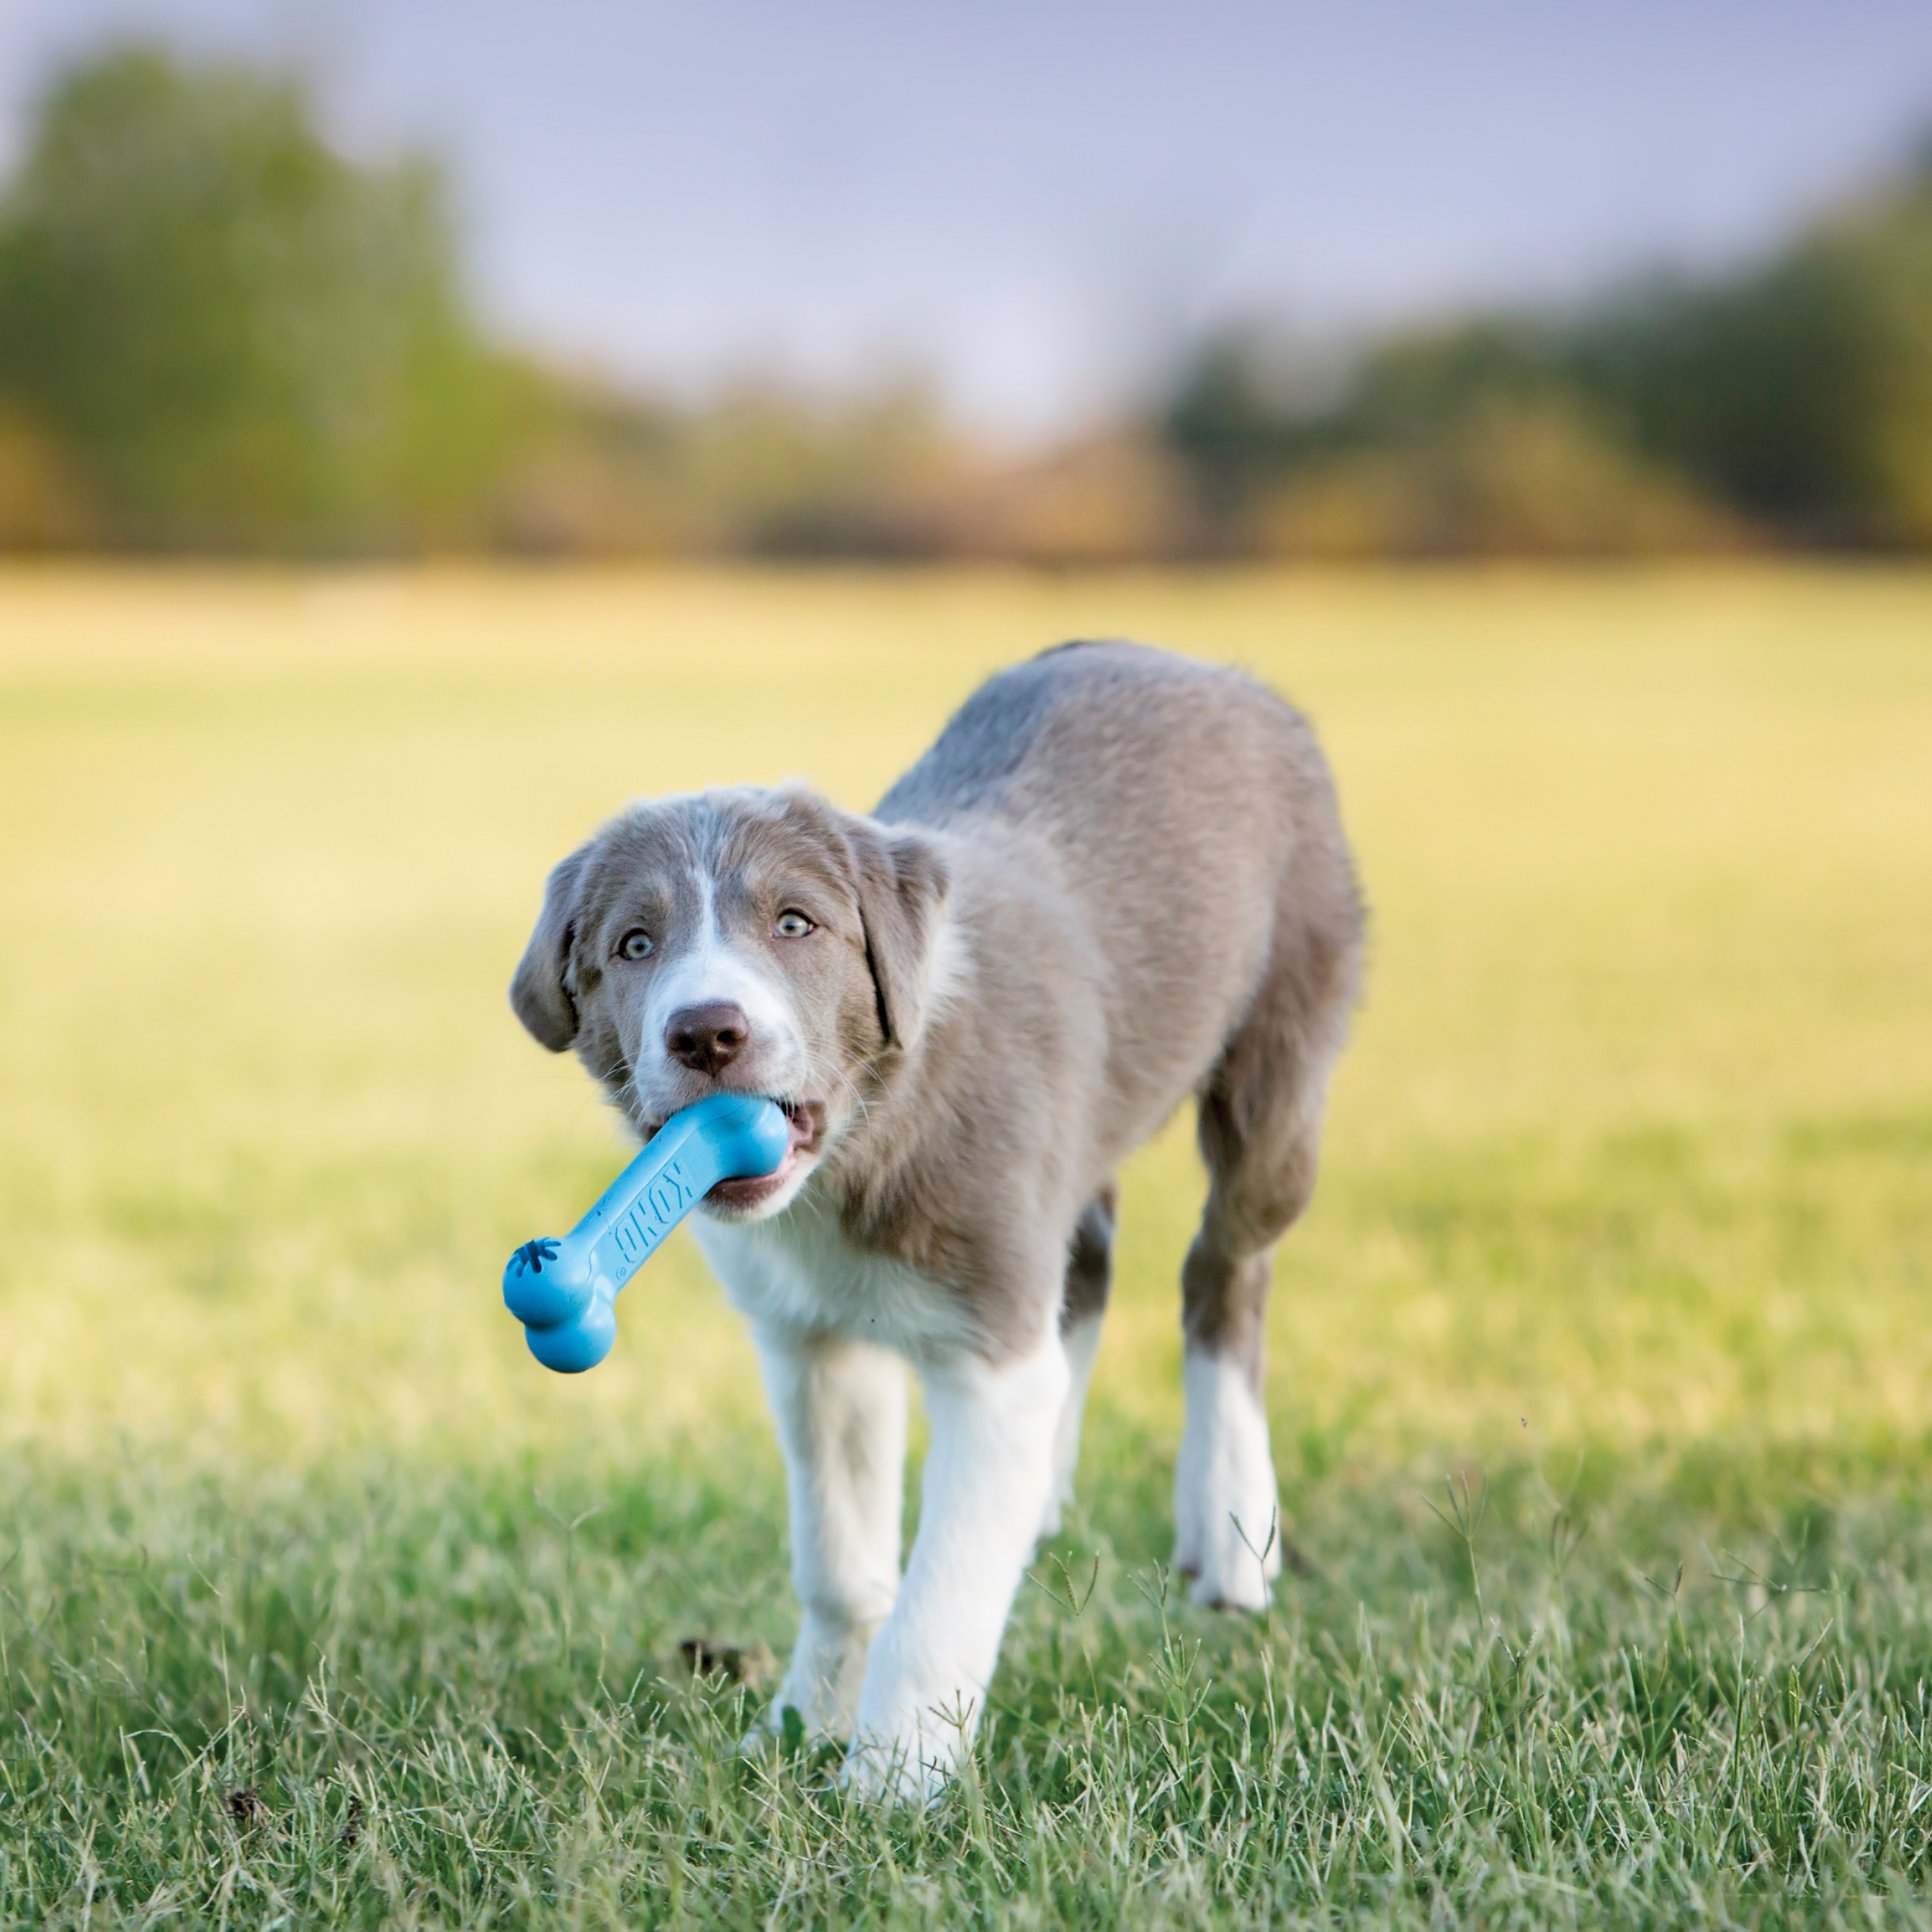 KONG Puppy Goodie Bone lifestyle product image